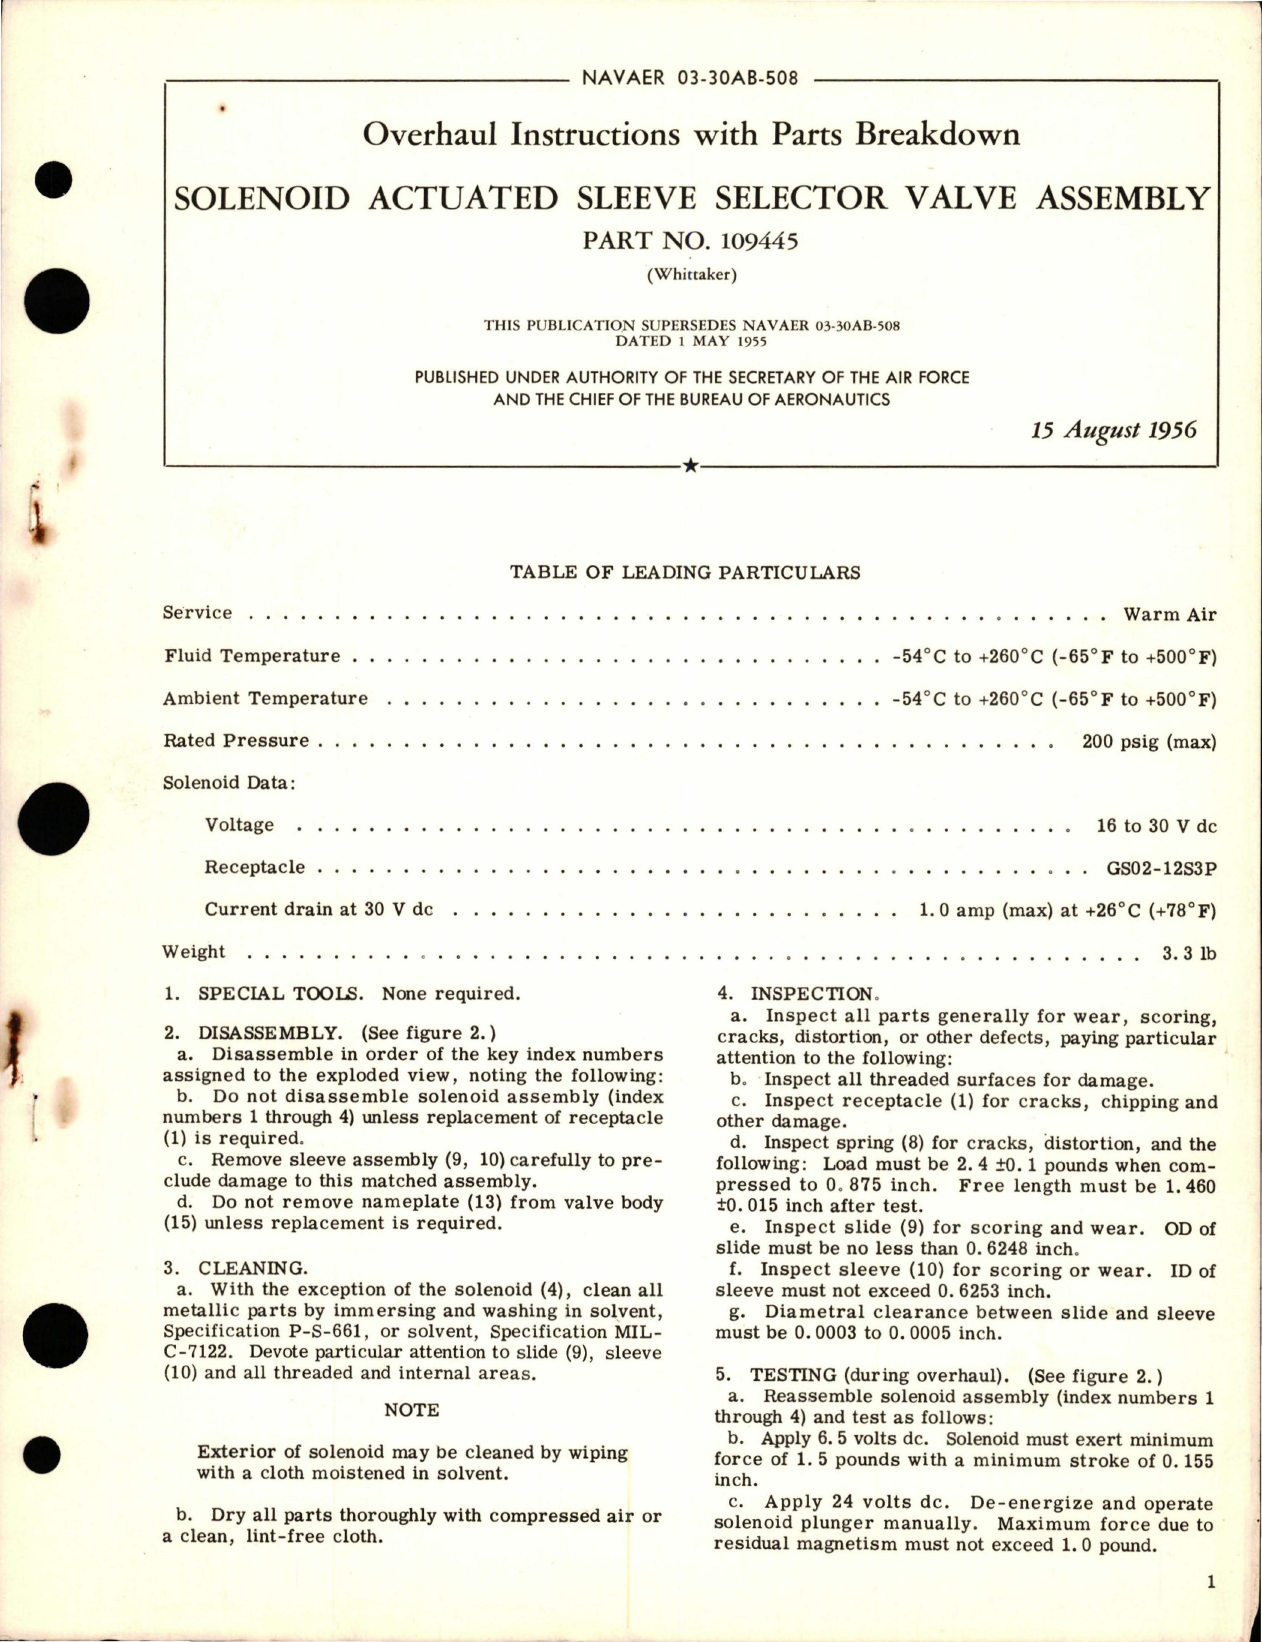 Sample page 1 from AirCorps Library document: Overhaul Instructions with Parts Breakdown for Solenoid Actuated Sleeve Selector Valve Assembly - Part 109445 